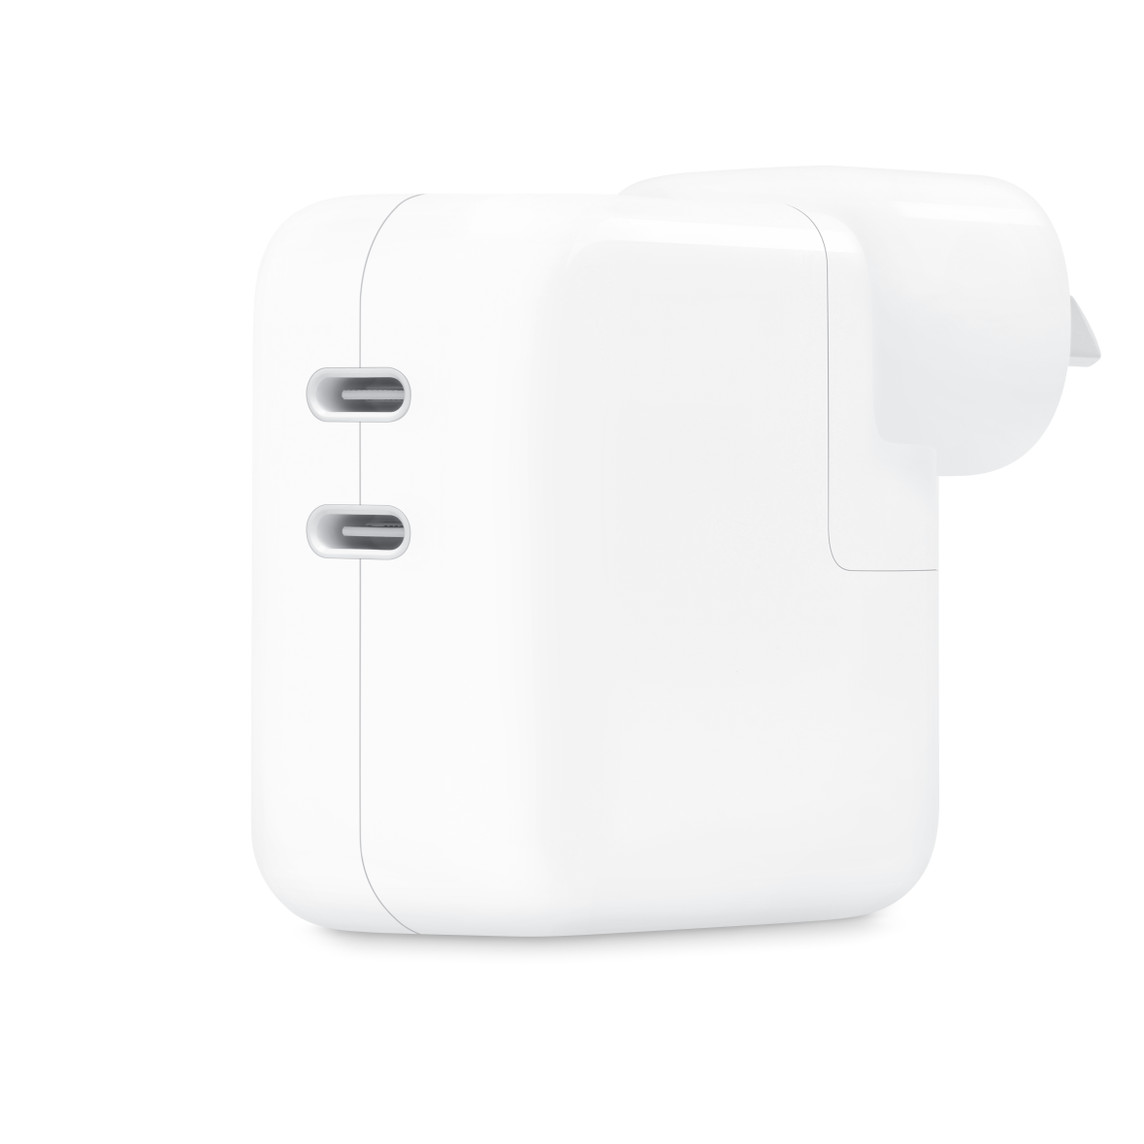 The 35-watt Dual USB-C Port Power Adapter allows you to charge two devices at the same time.